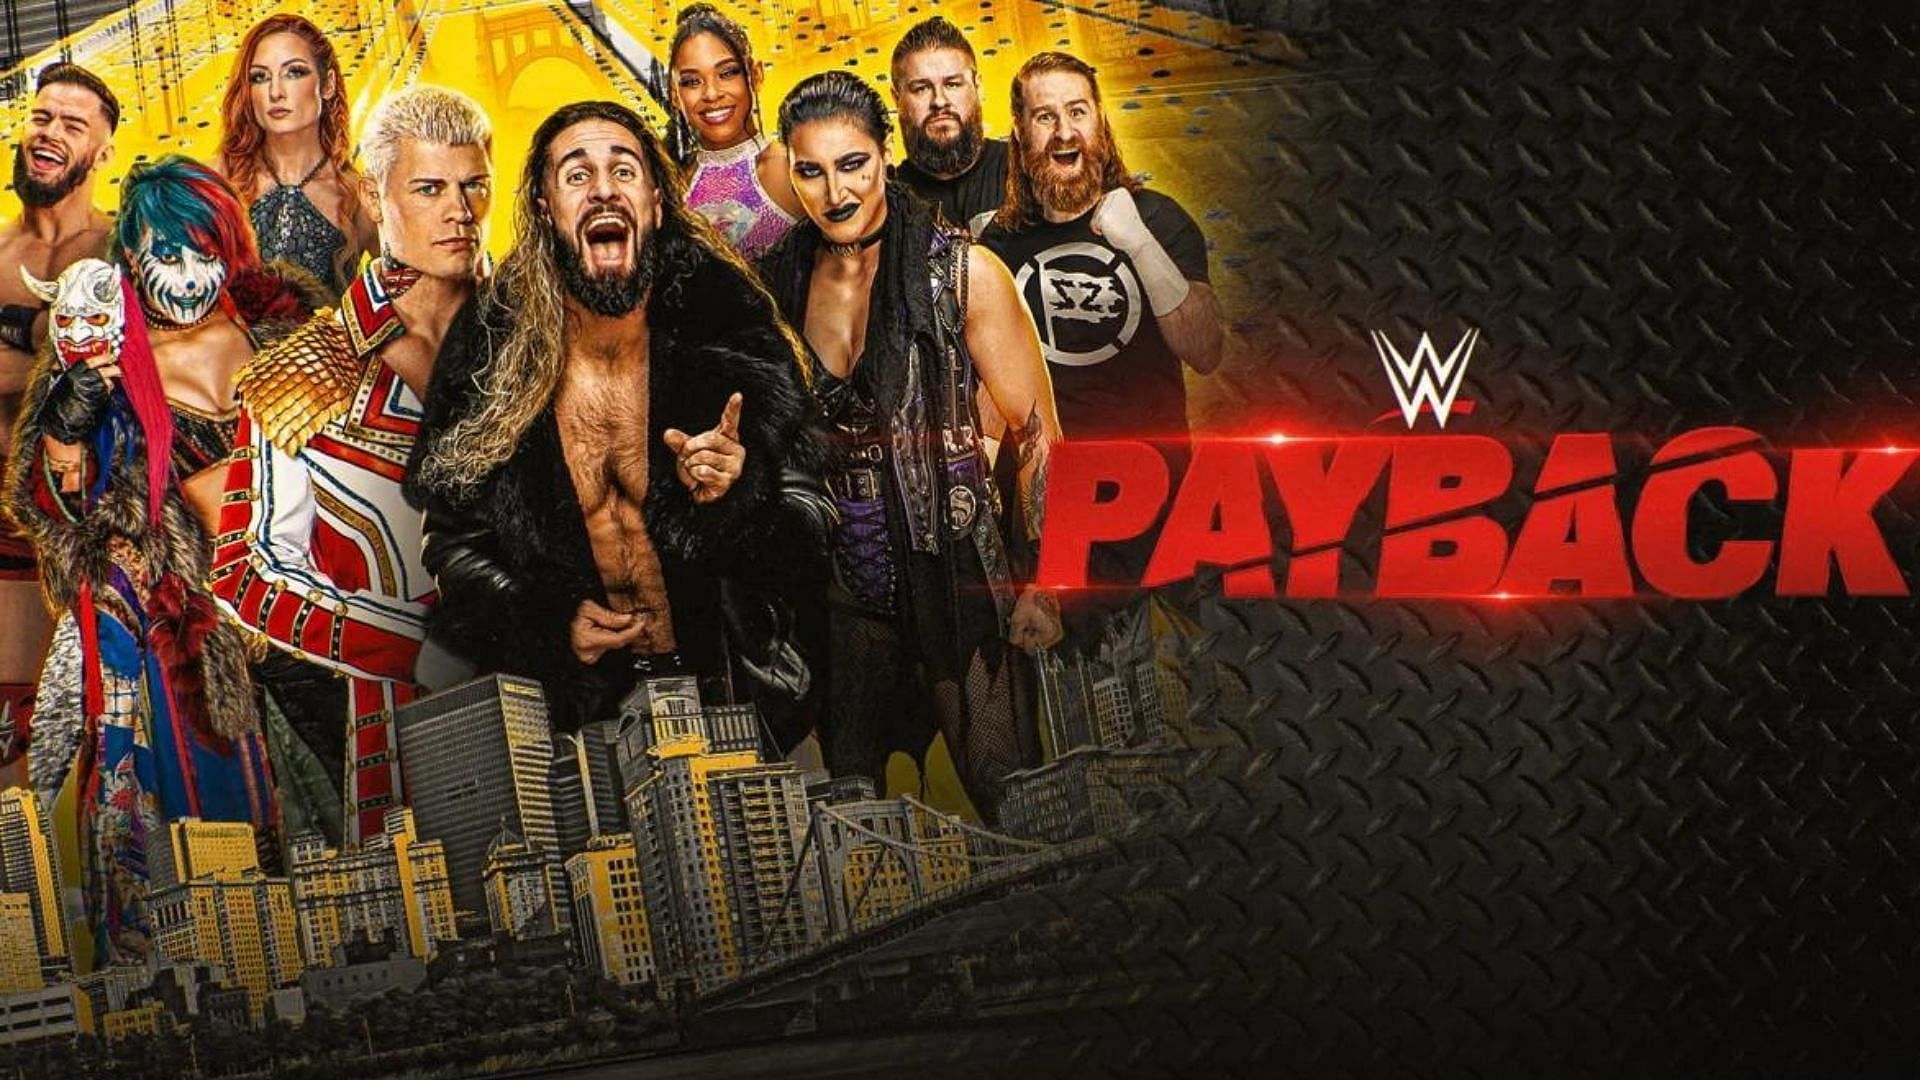 We got a hard-hitting WWE Payback tonight with a big title change and the return of Jey Uso!